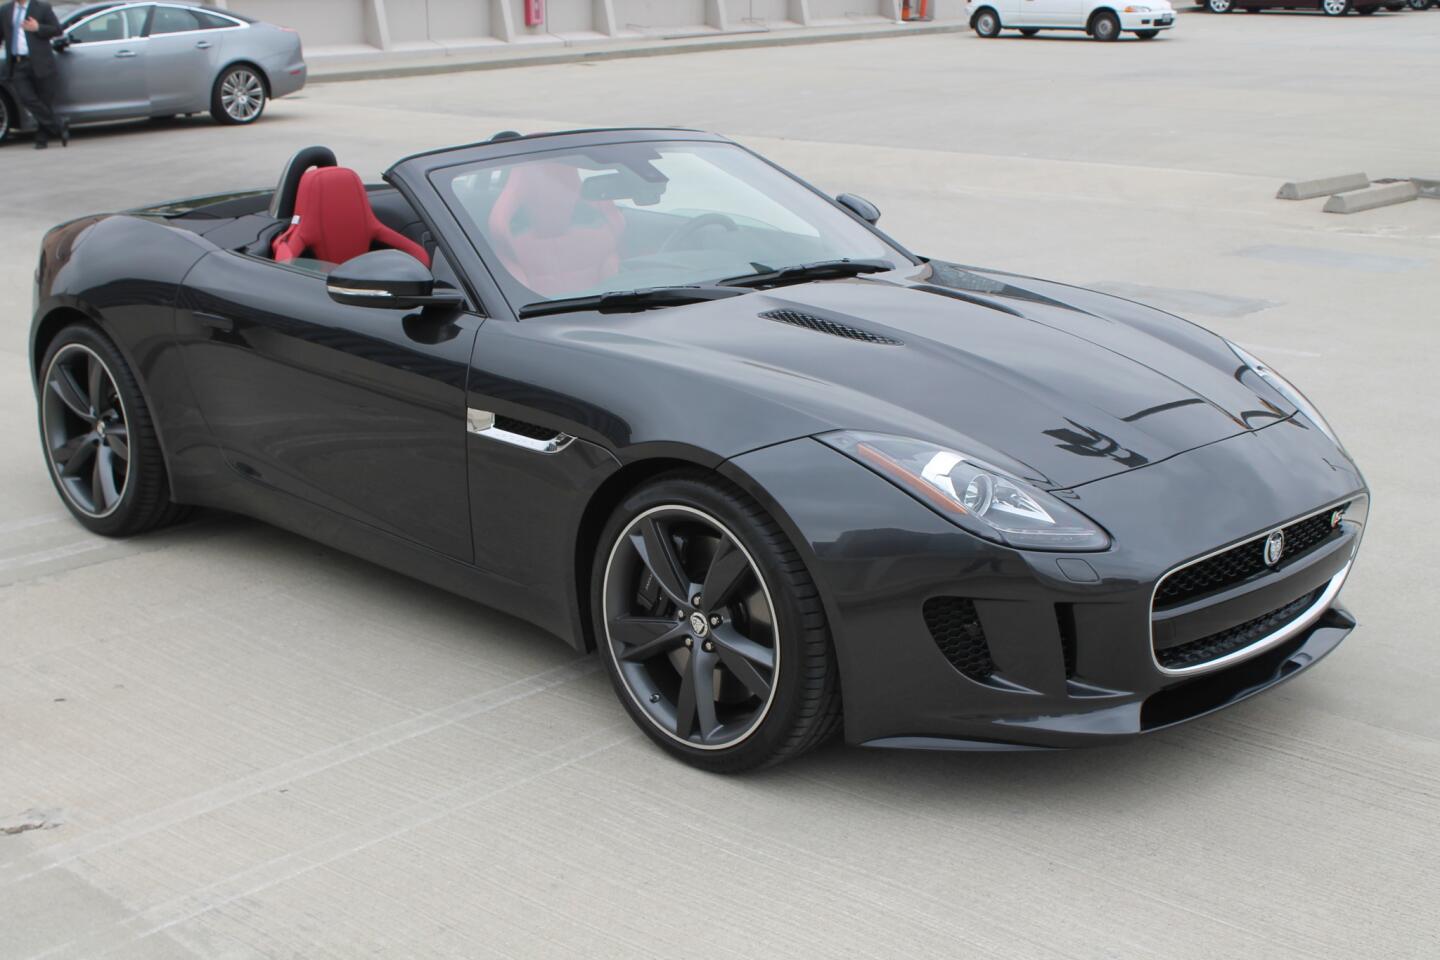 The 2014 Jaguar F-Type is an all-new, two-seat, rear-wheel-drive convertible. When it goes on sales in mid-May, it will be available with one of two supercharged V-6 engines or a supercharged V-8.